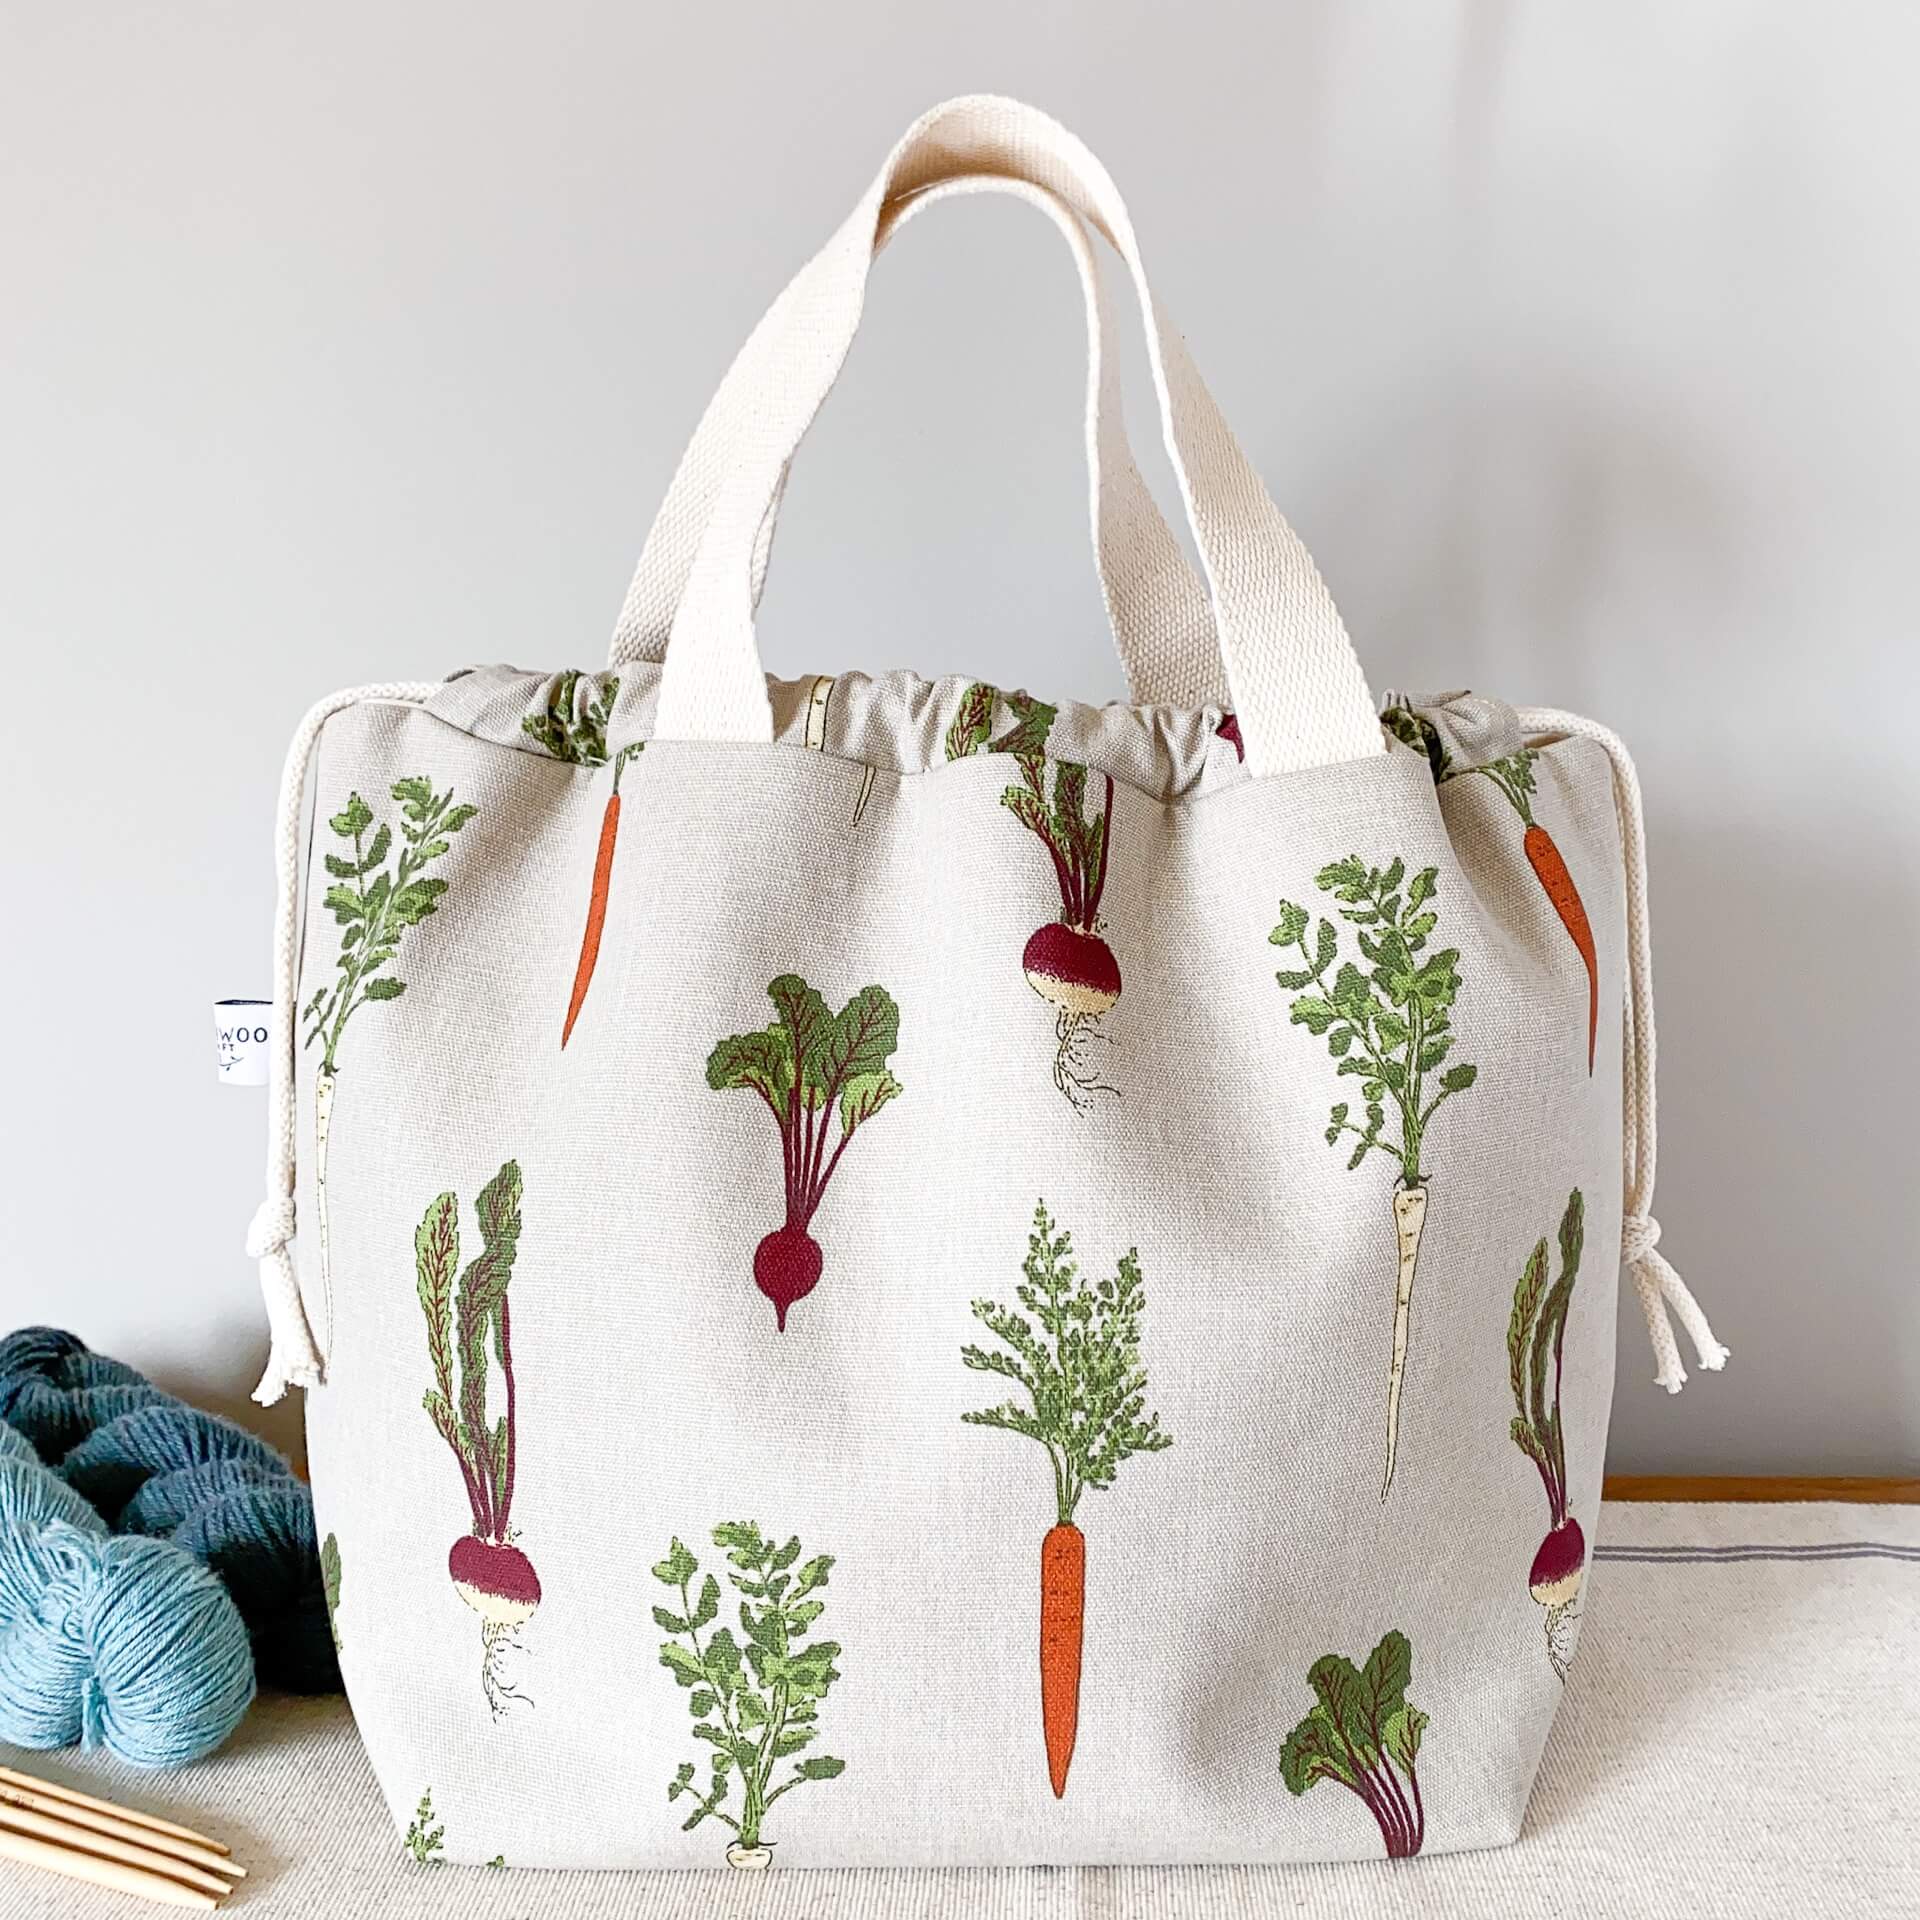 A large knitting project bag featuring a home grown vegetable print fabric, sits on a table next to two skeins of yarn and a set of wooden knitting needles. 